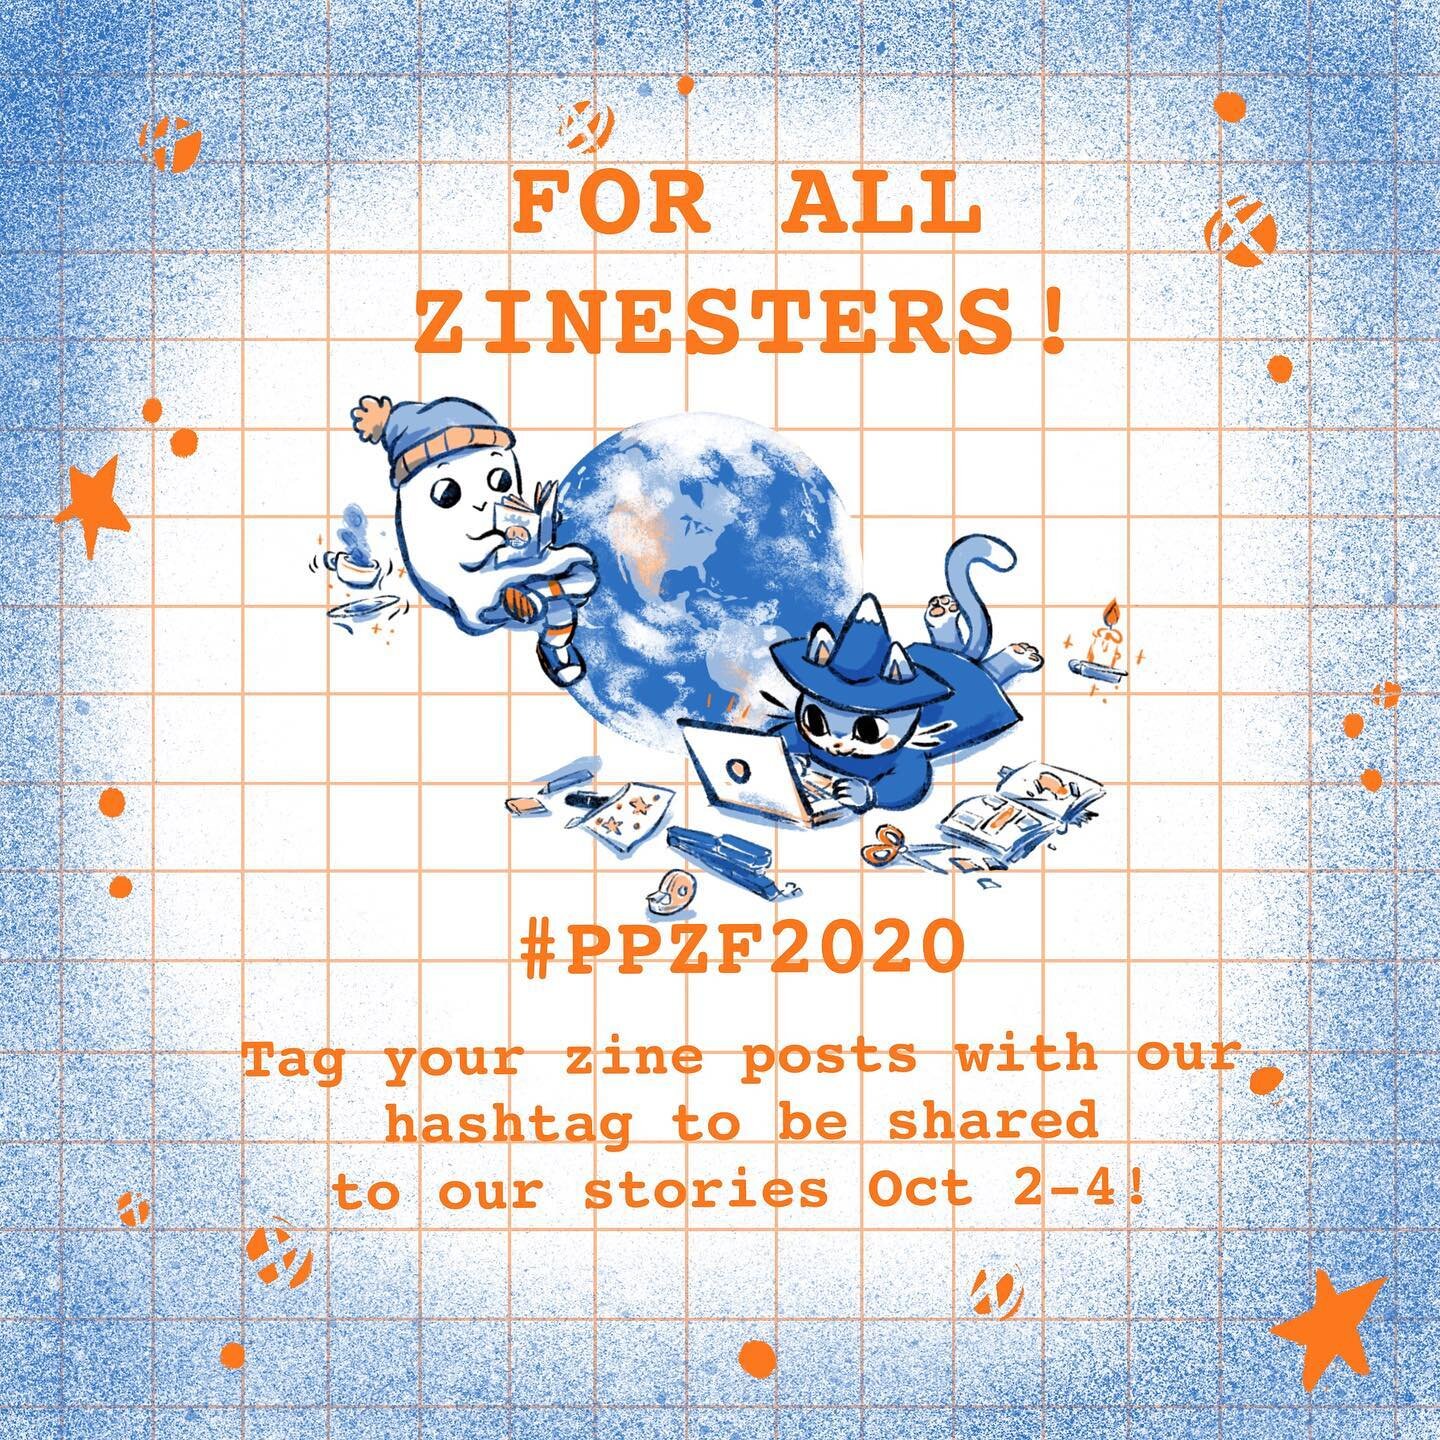 Calling ALL zinesters and self-publishers!! Join in on @pikespeakzinefest &lsquo;s virtual event Oct 2-4 by posting your zines to your fav social media app with the hashtag #PPZF2020!  We&rsquo;ll be reposting tagged posts to @pikespeakzinefest&rsquo